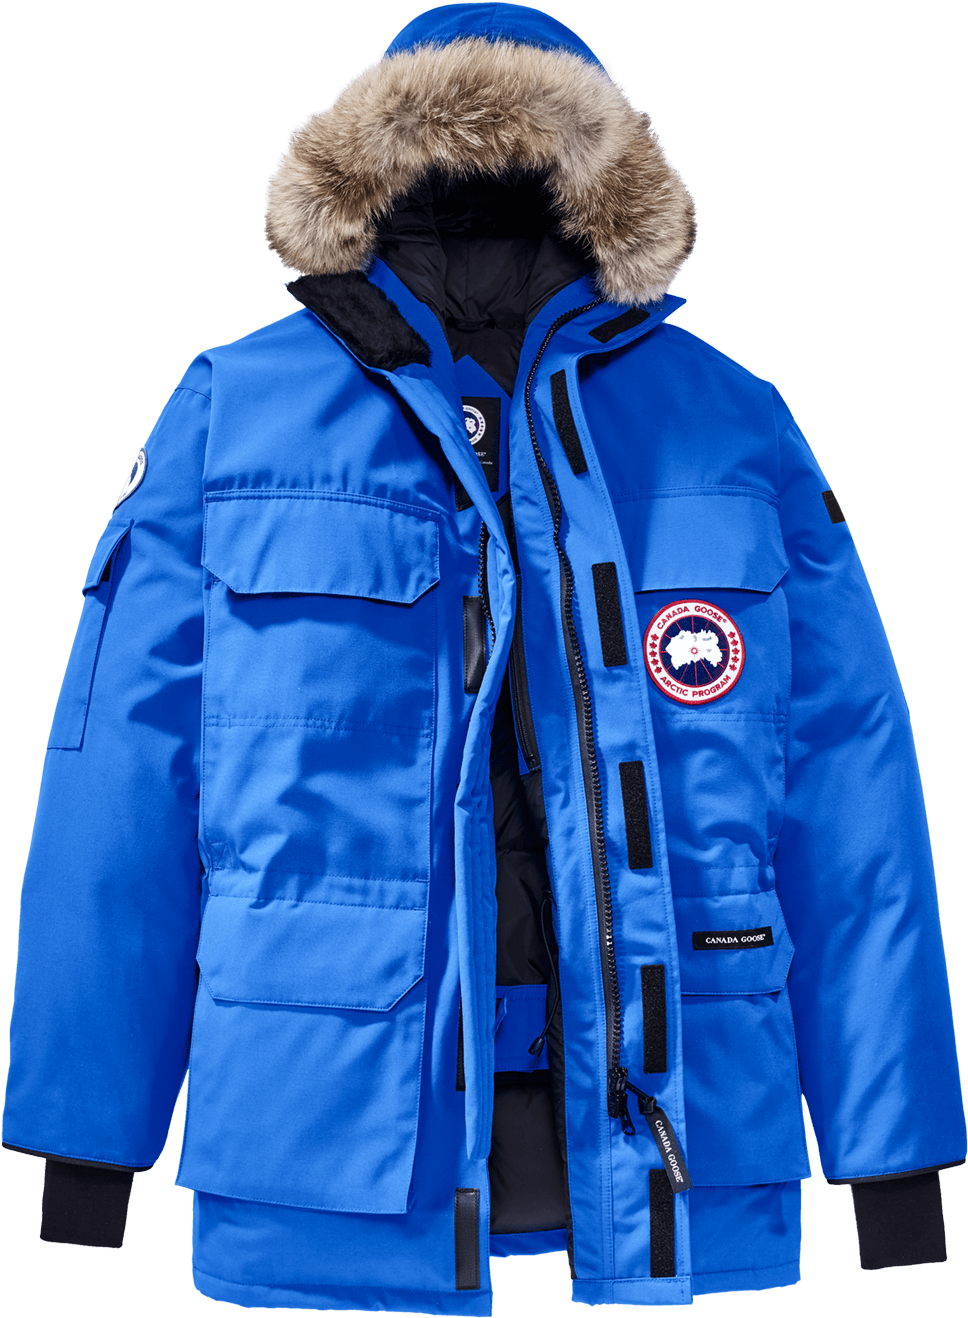 Show Your Support - Mens Canada Goose Jacket Blue (1200x1800)